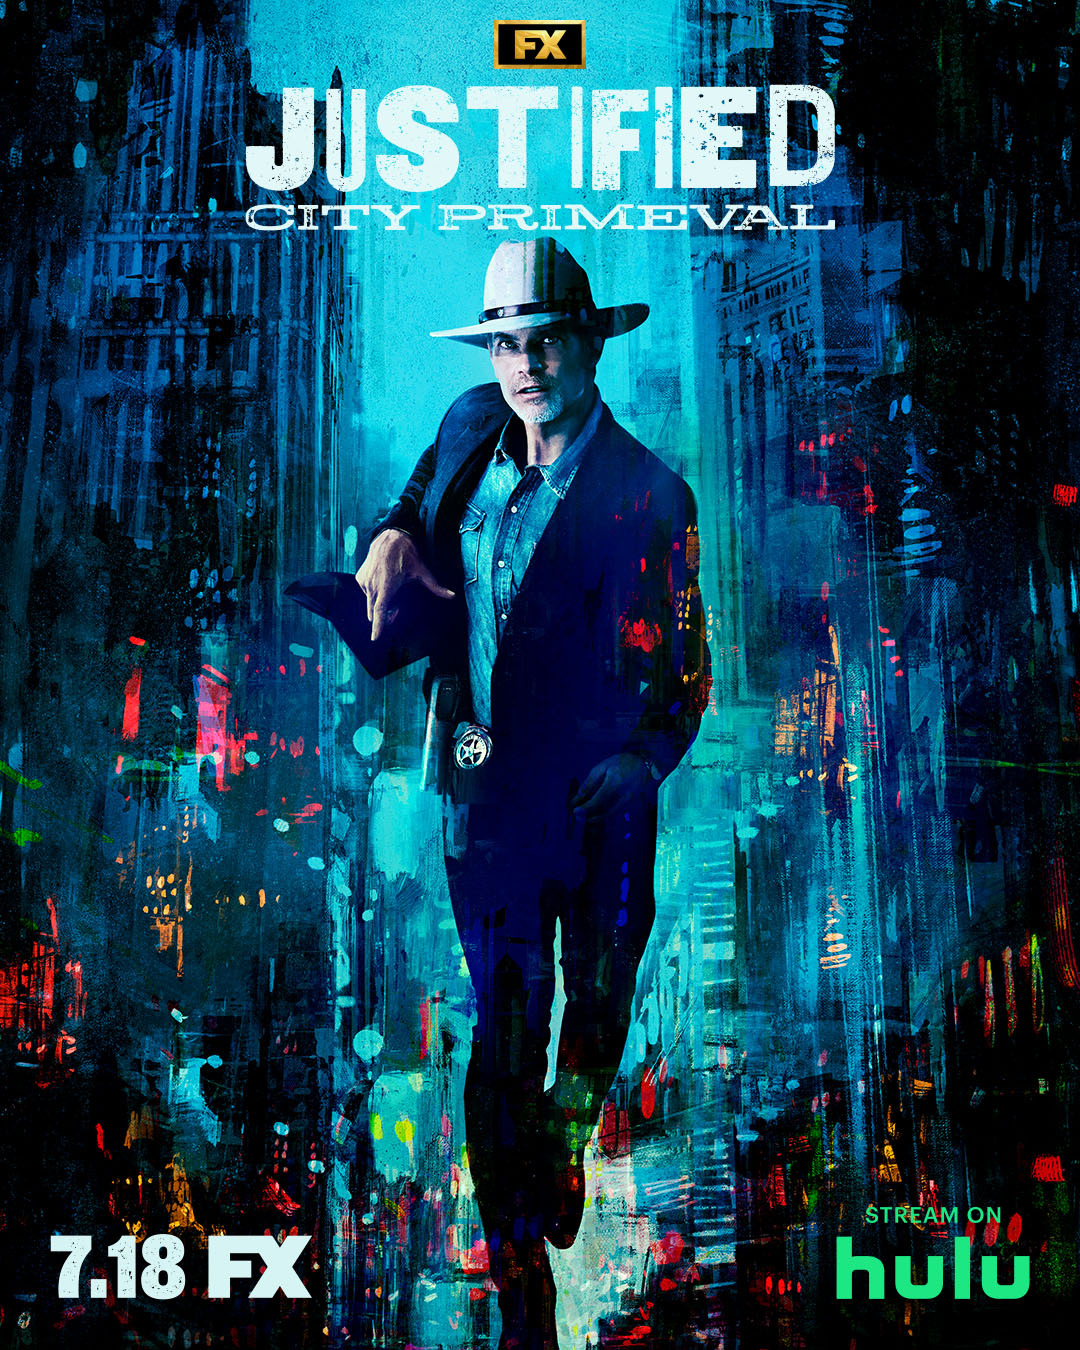 Extra Large TV Poster Image for Justified: City Primeval 